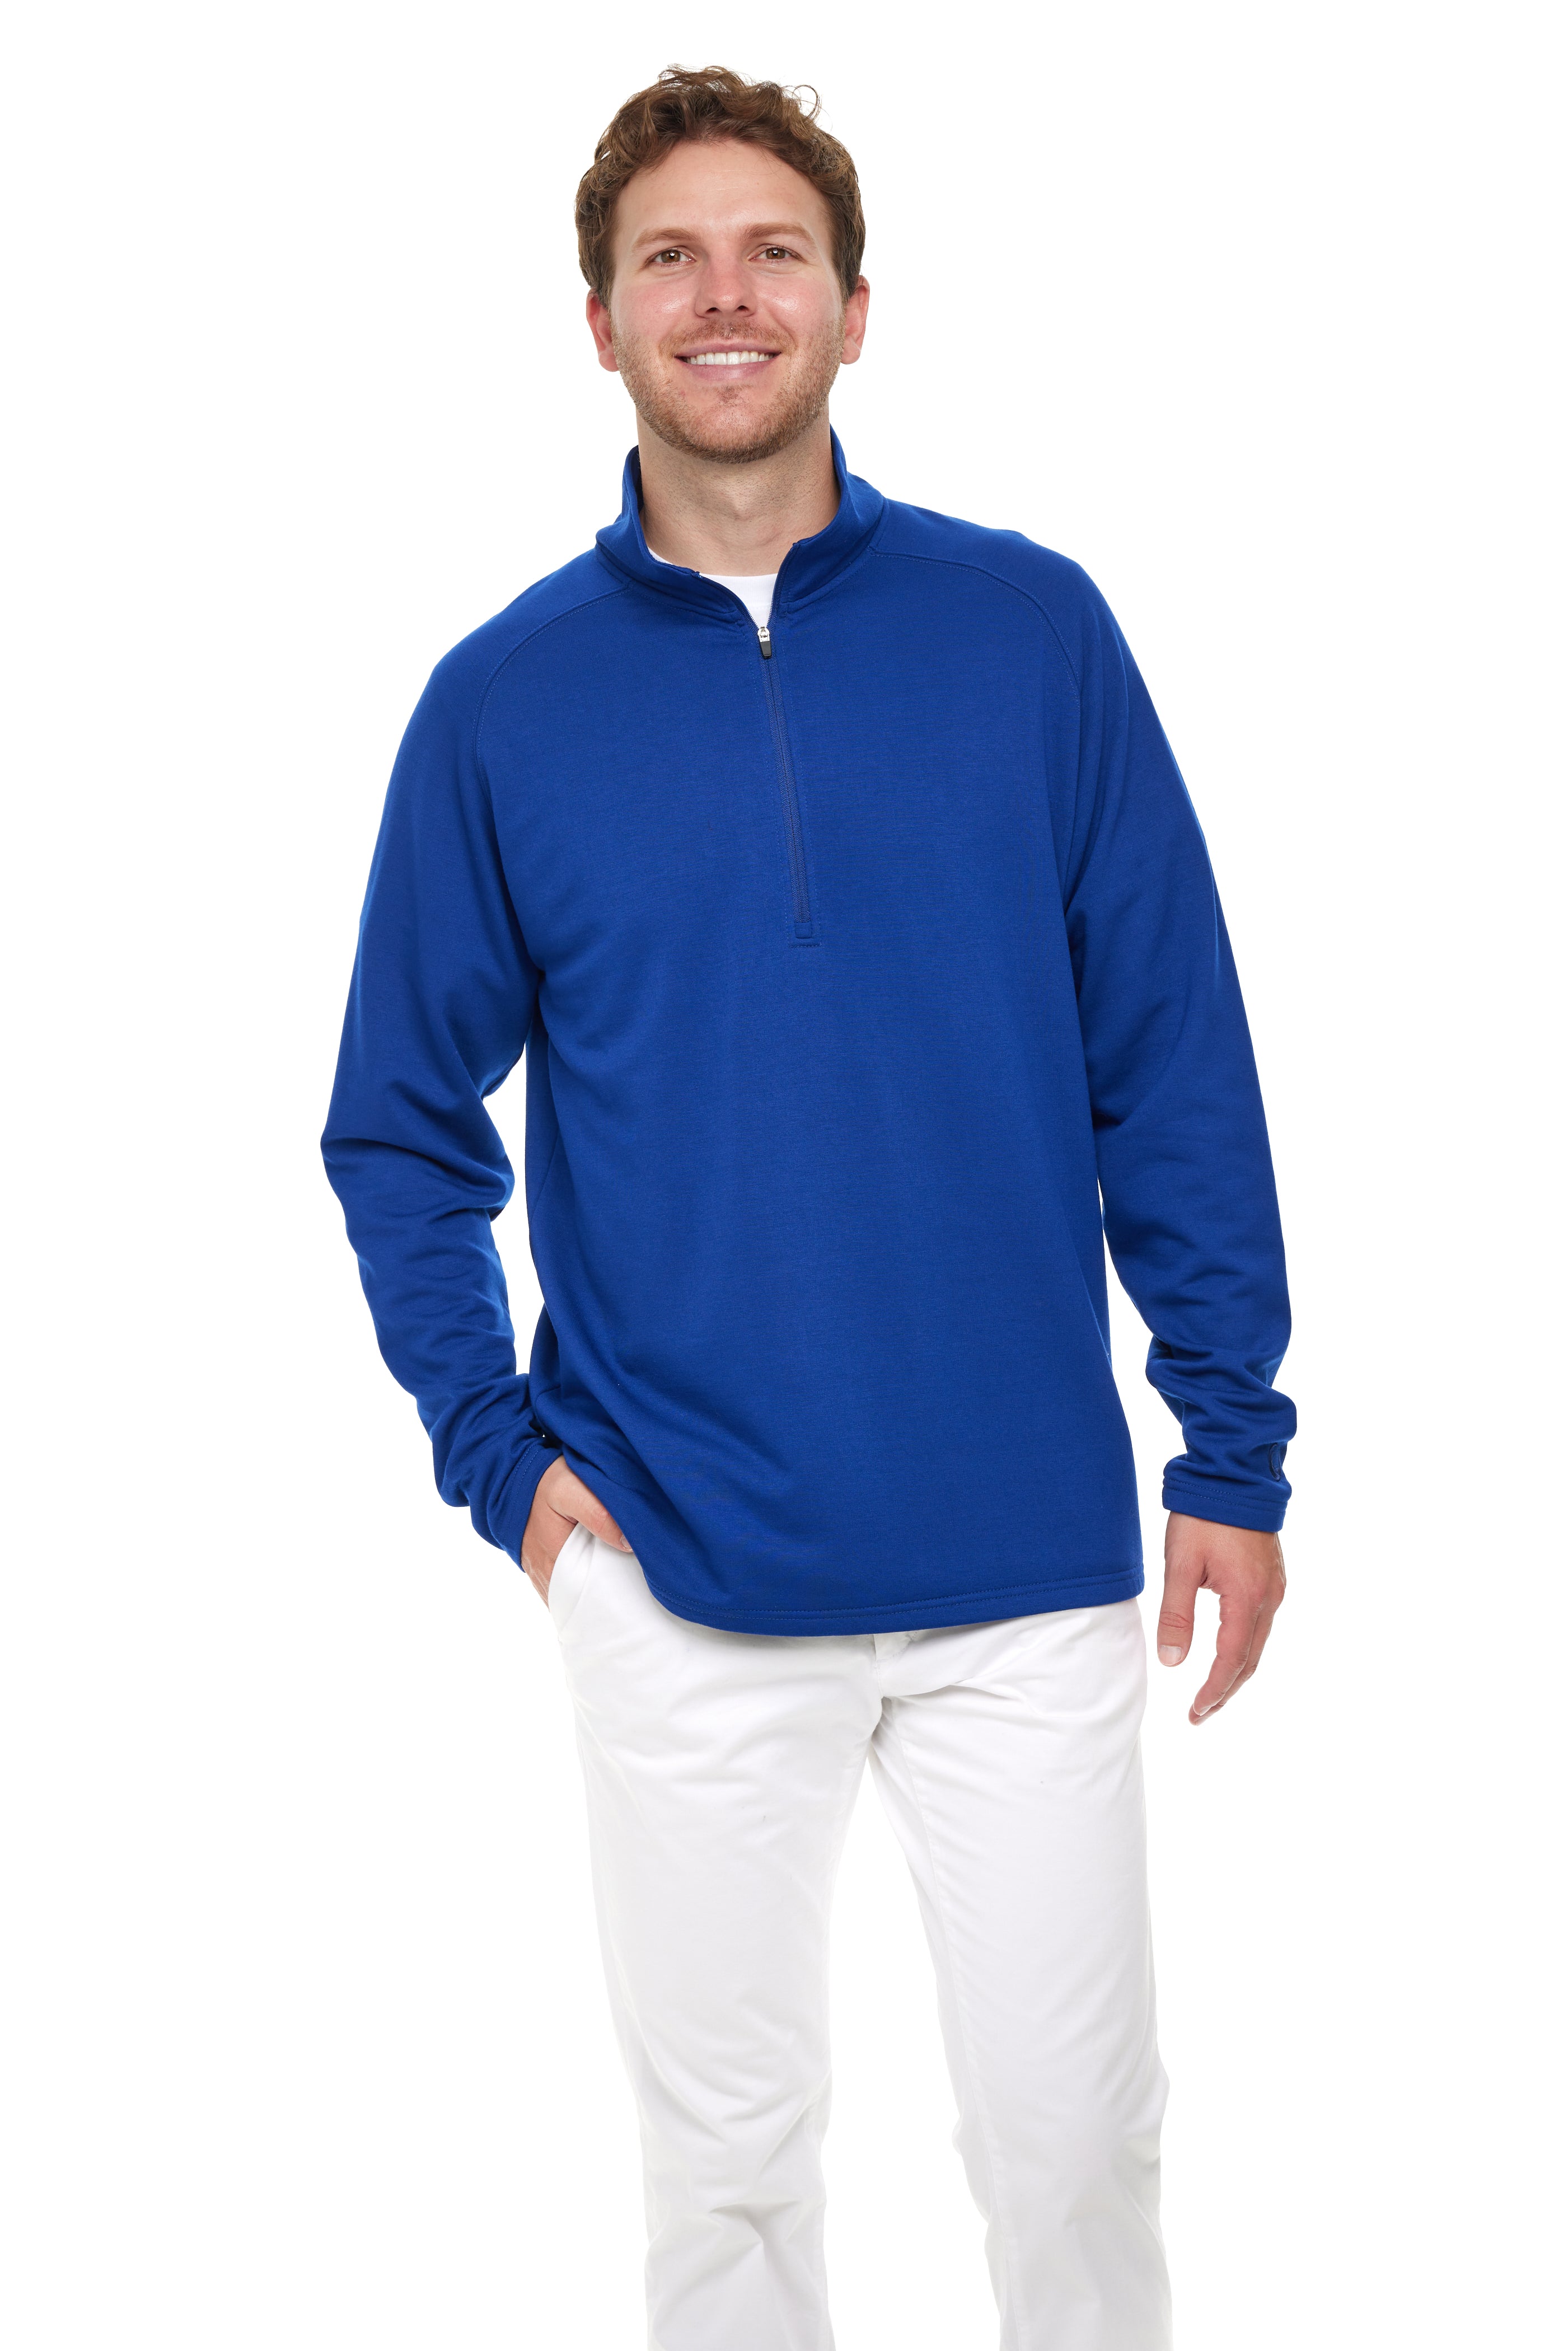 male model wearing blue pullover, best pullover to wear to the beach, coastal clothing, vacation clothes, florida sweater